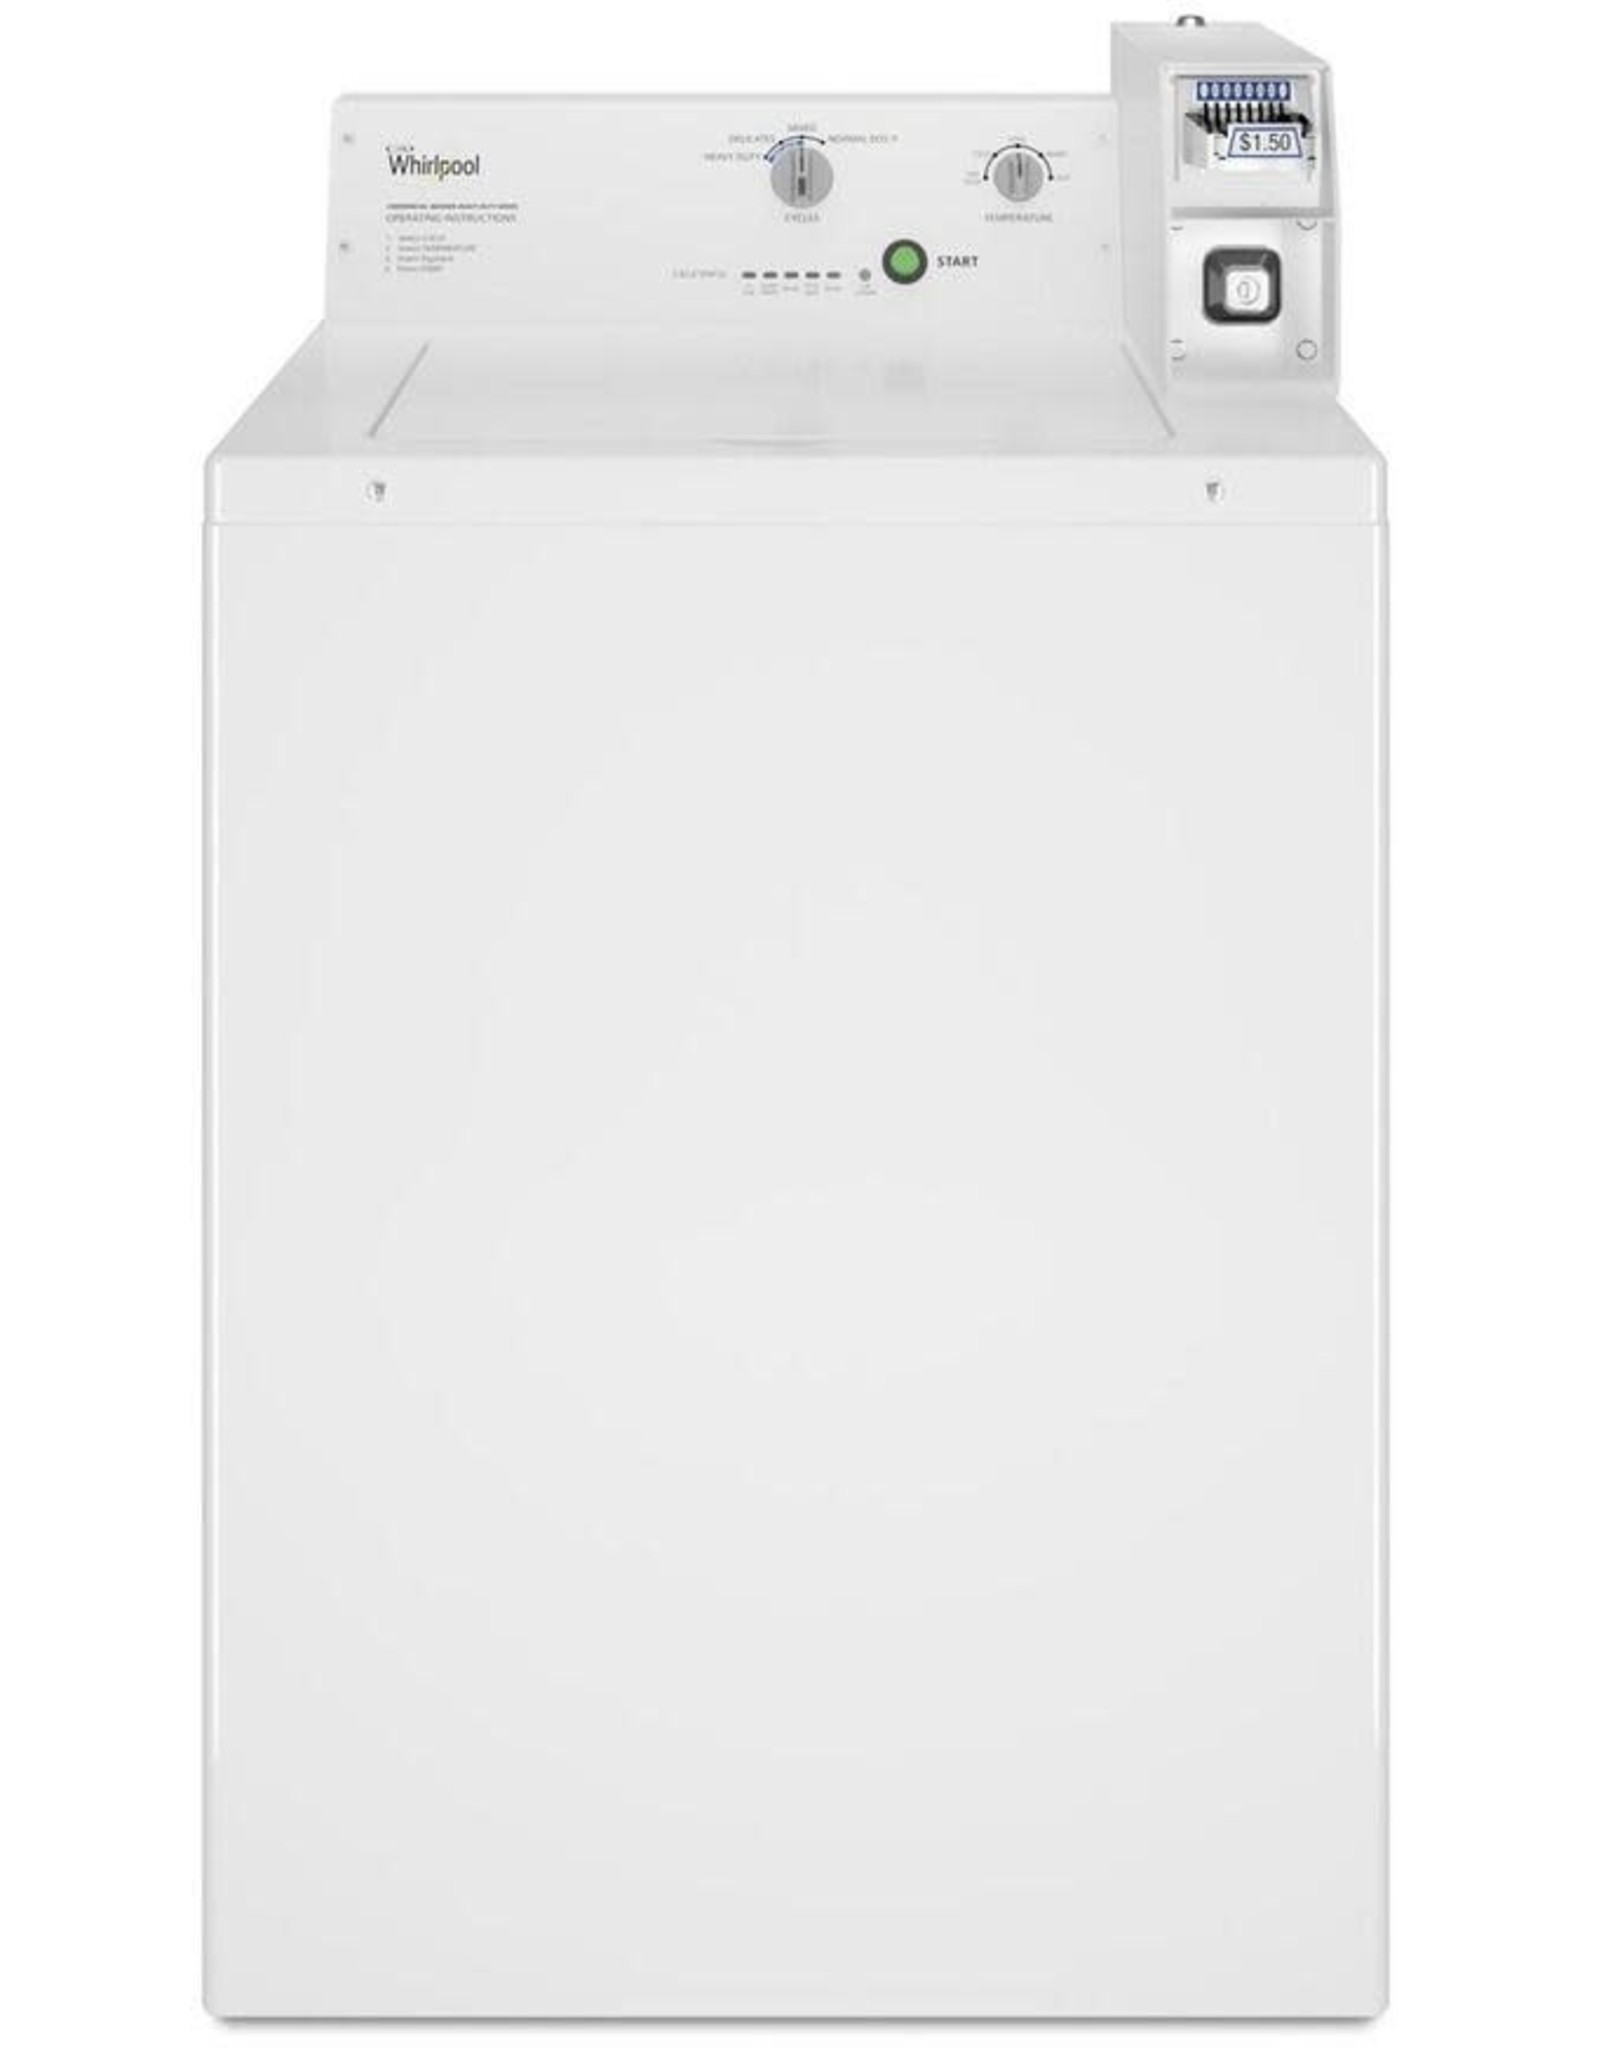 WHIRLPOOL CAE2745FQ  Whirlpool 3.3 cu. ft. White Commercial Top Load Washing Machine Coin Operated